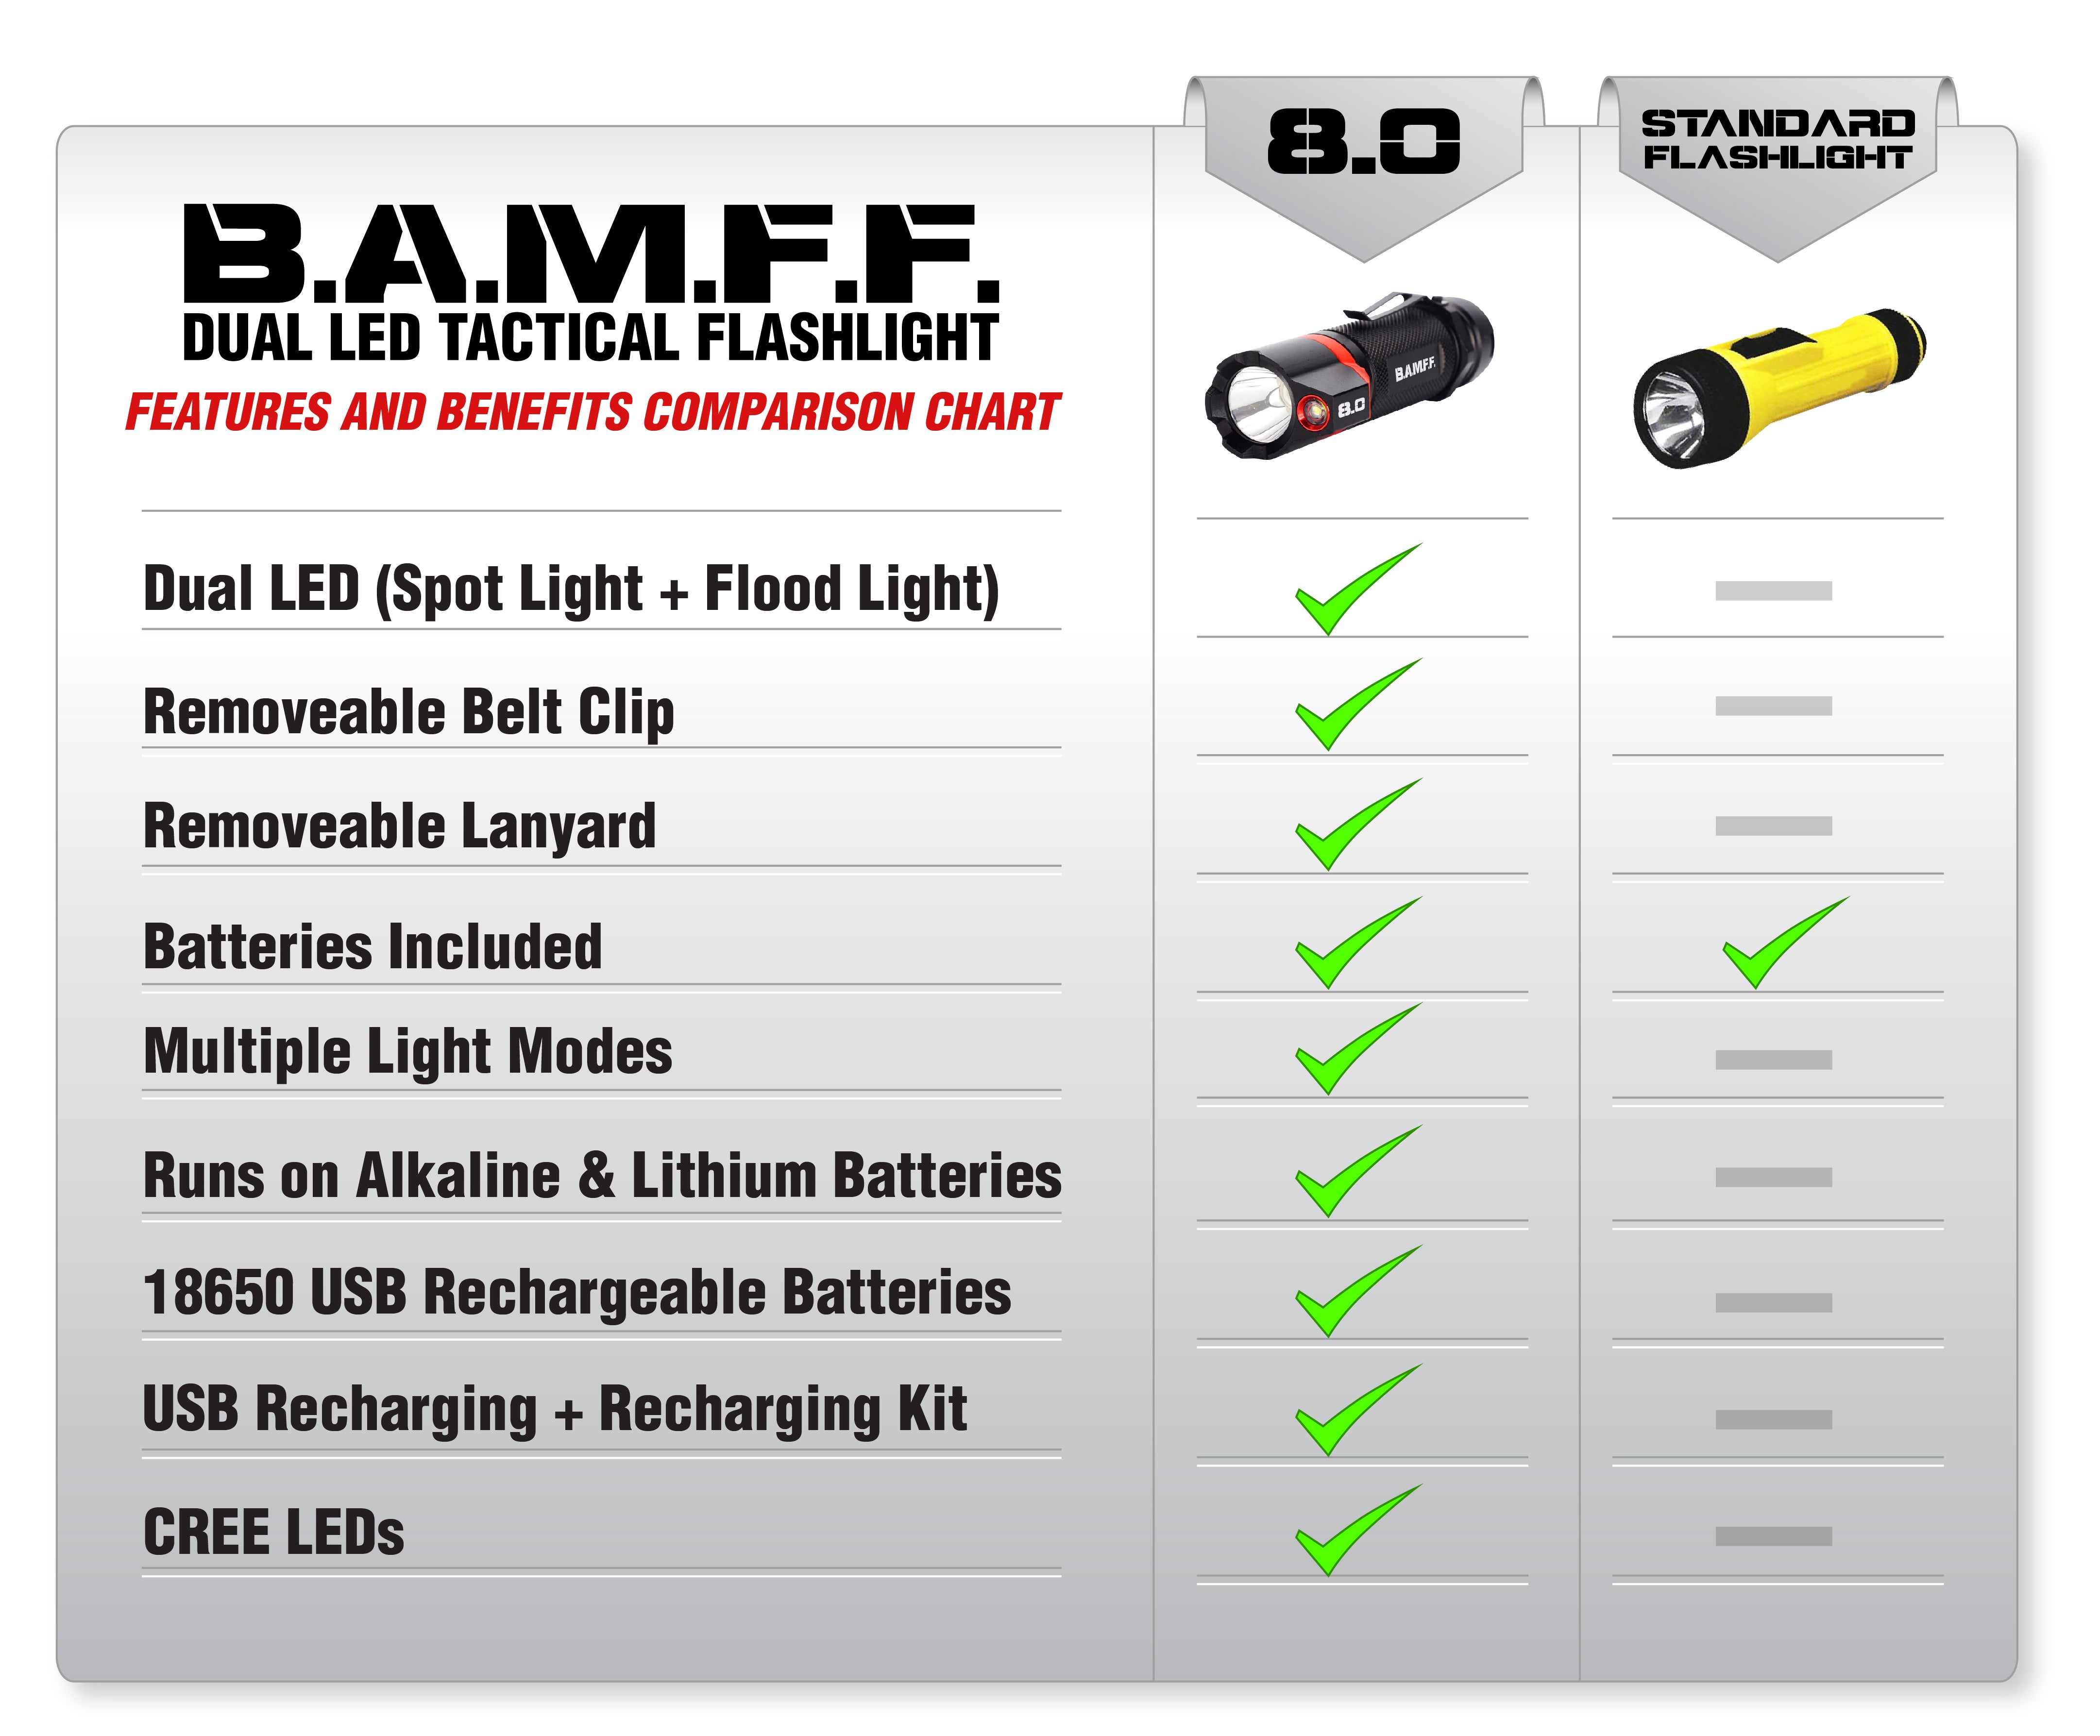 A chart showing why the BAMFF 8.0 Tactical Flashlight is better than a standard flashlight. The only feature that they both share a check mark in is Batteries Included. All the rest only the BAMFF has check marks in. Those include: Dual LED (spot light + flood light), removeable belt clip, removeable lanyard, batteries included, multiple light modes, runs on alkaline & lithium batteries, 18650 USB rechargeable batteries, USB Recharging + Recharging Kit, and CREE LEDs.